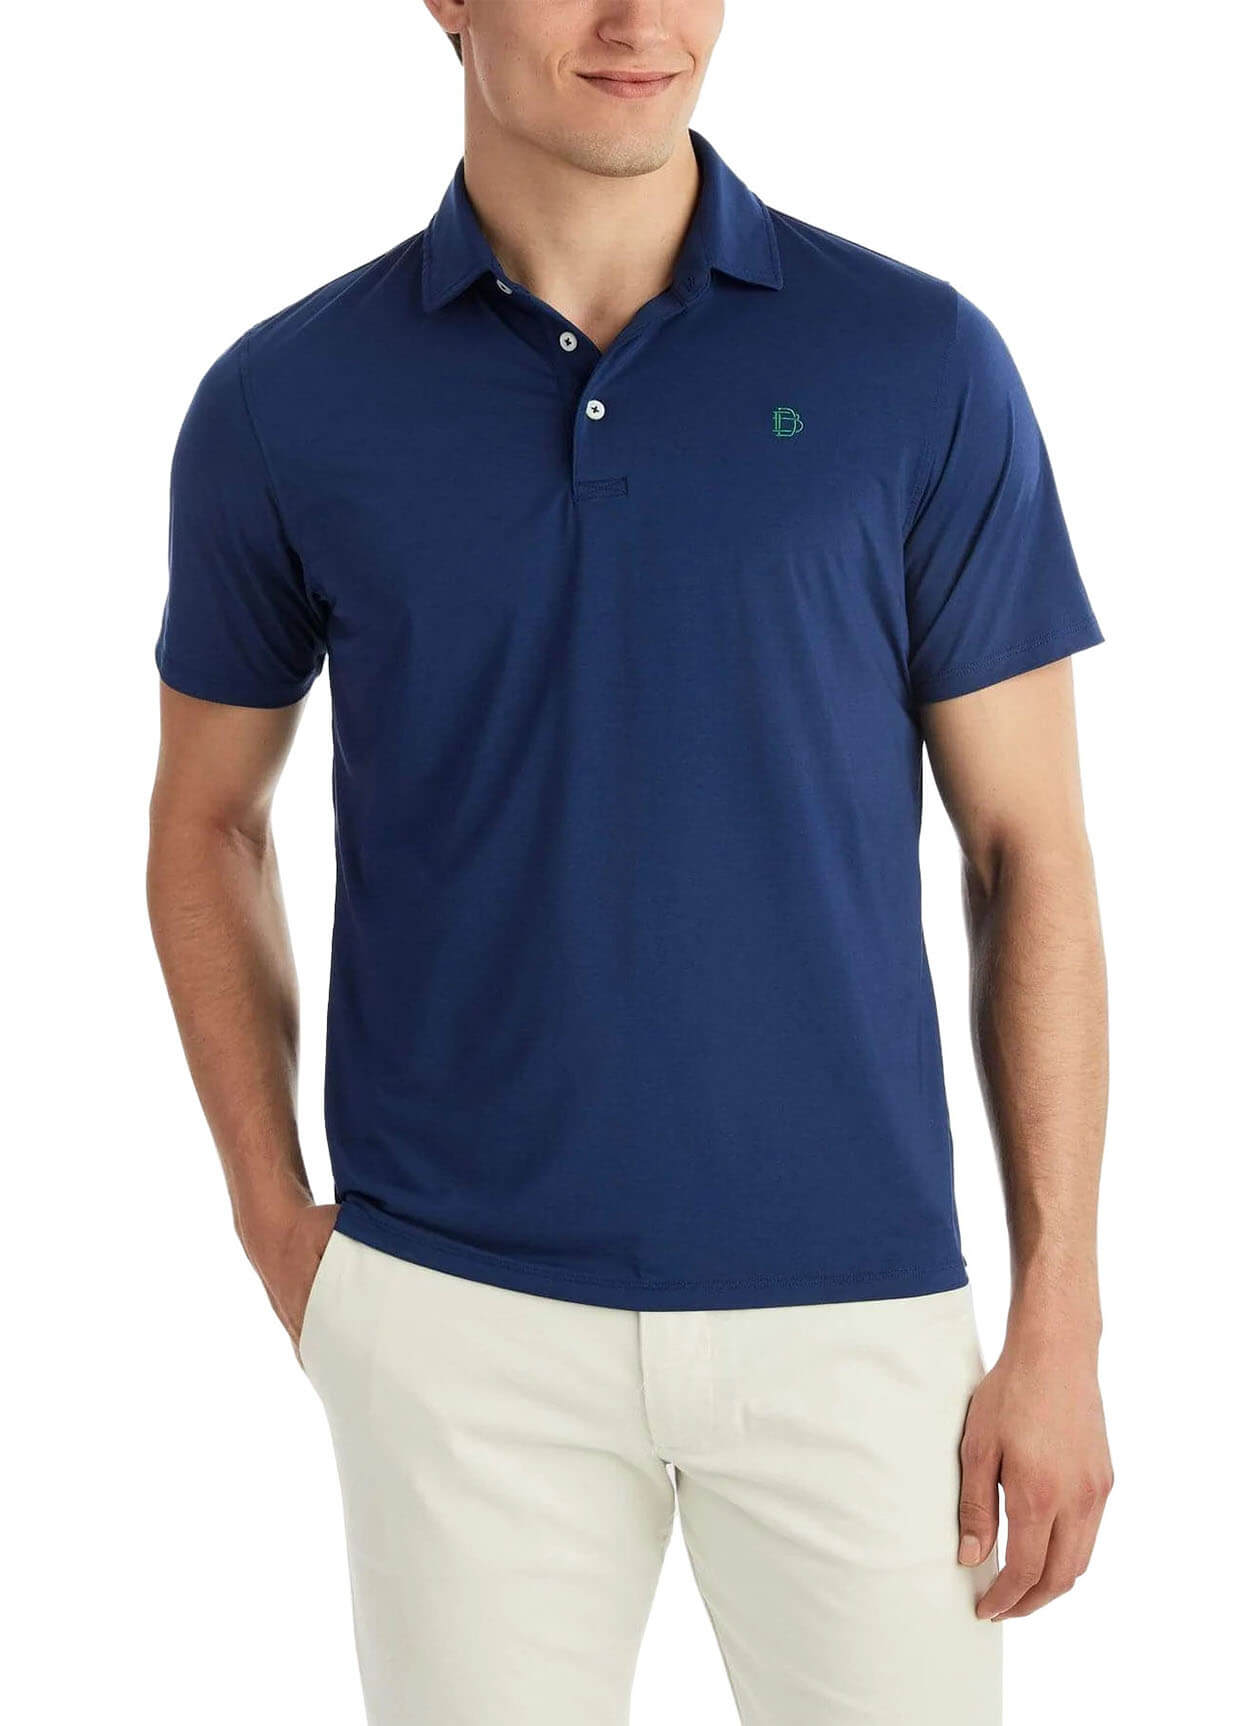 Chestnut Hill CH365 Men's Technical Performance Polo $21.10